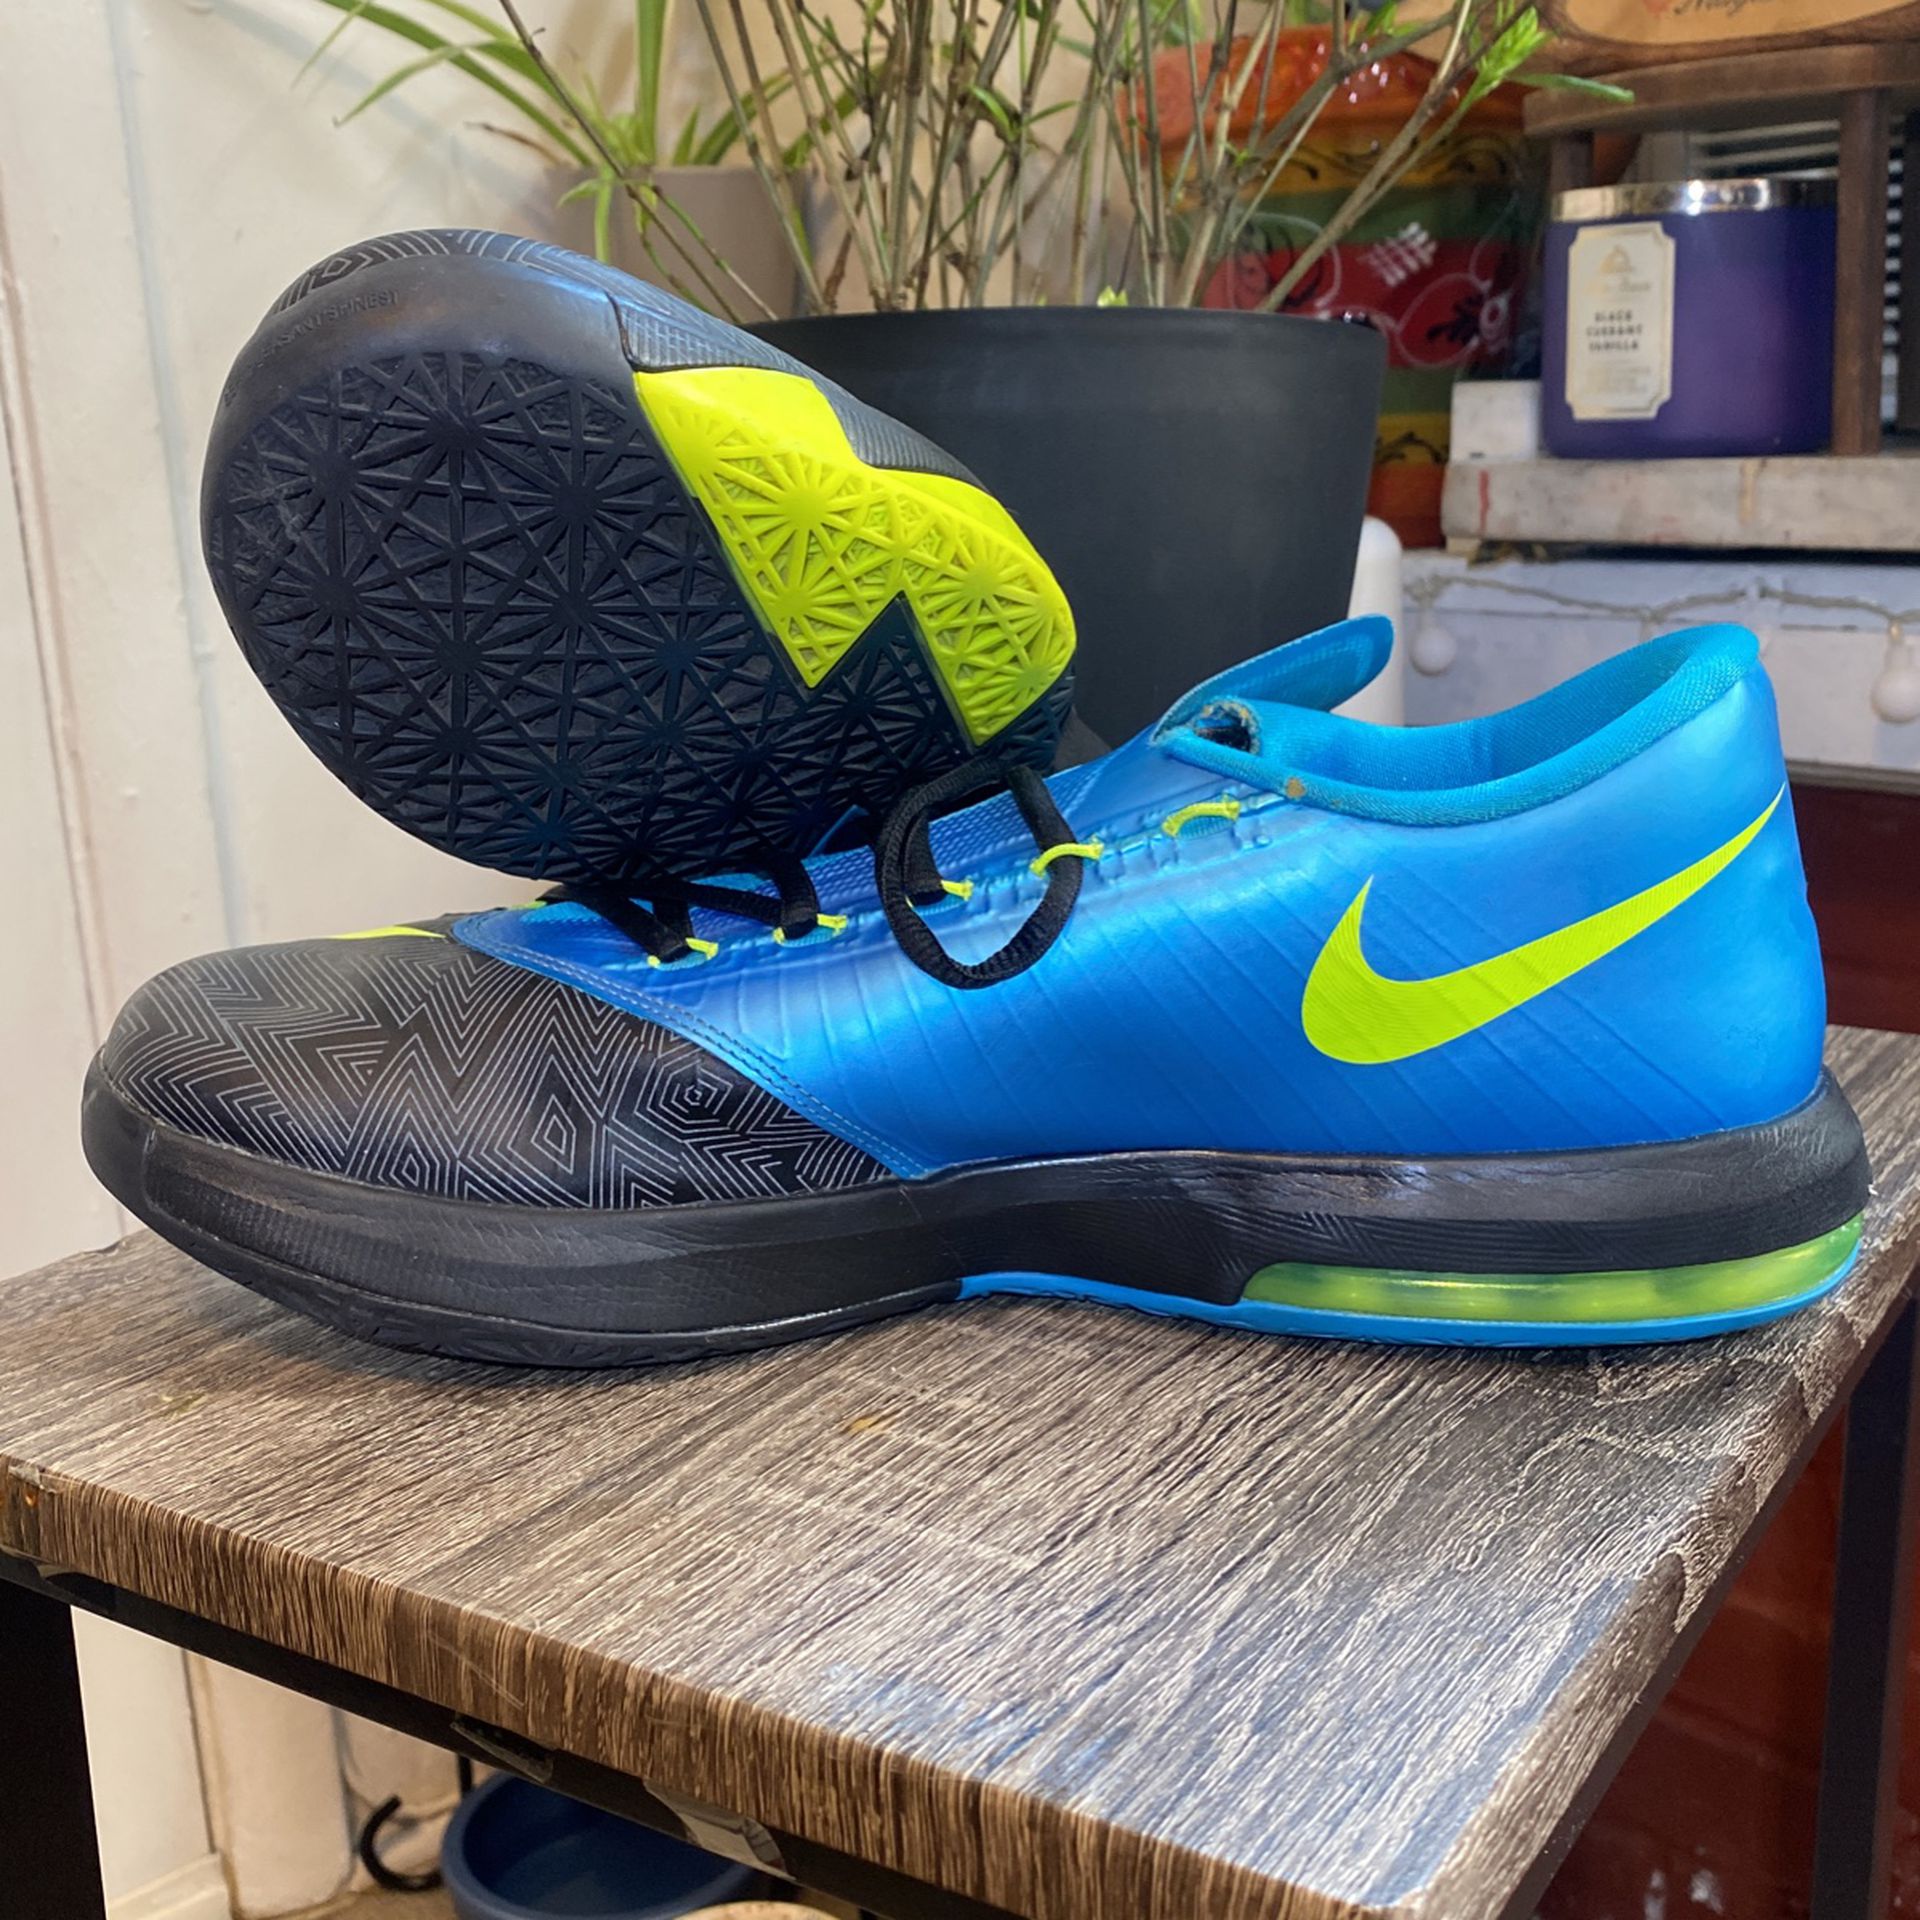 Used Good Condition Authenticity Guarantee NIKE KD 6 AWAY 2 2014 SIZE 11.5 for Sale in York, NY - OfferUp